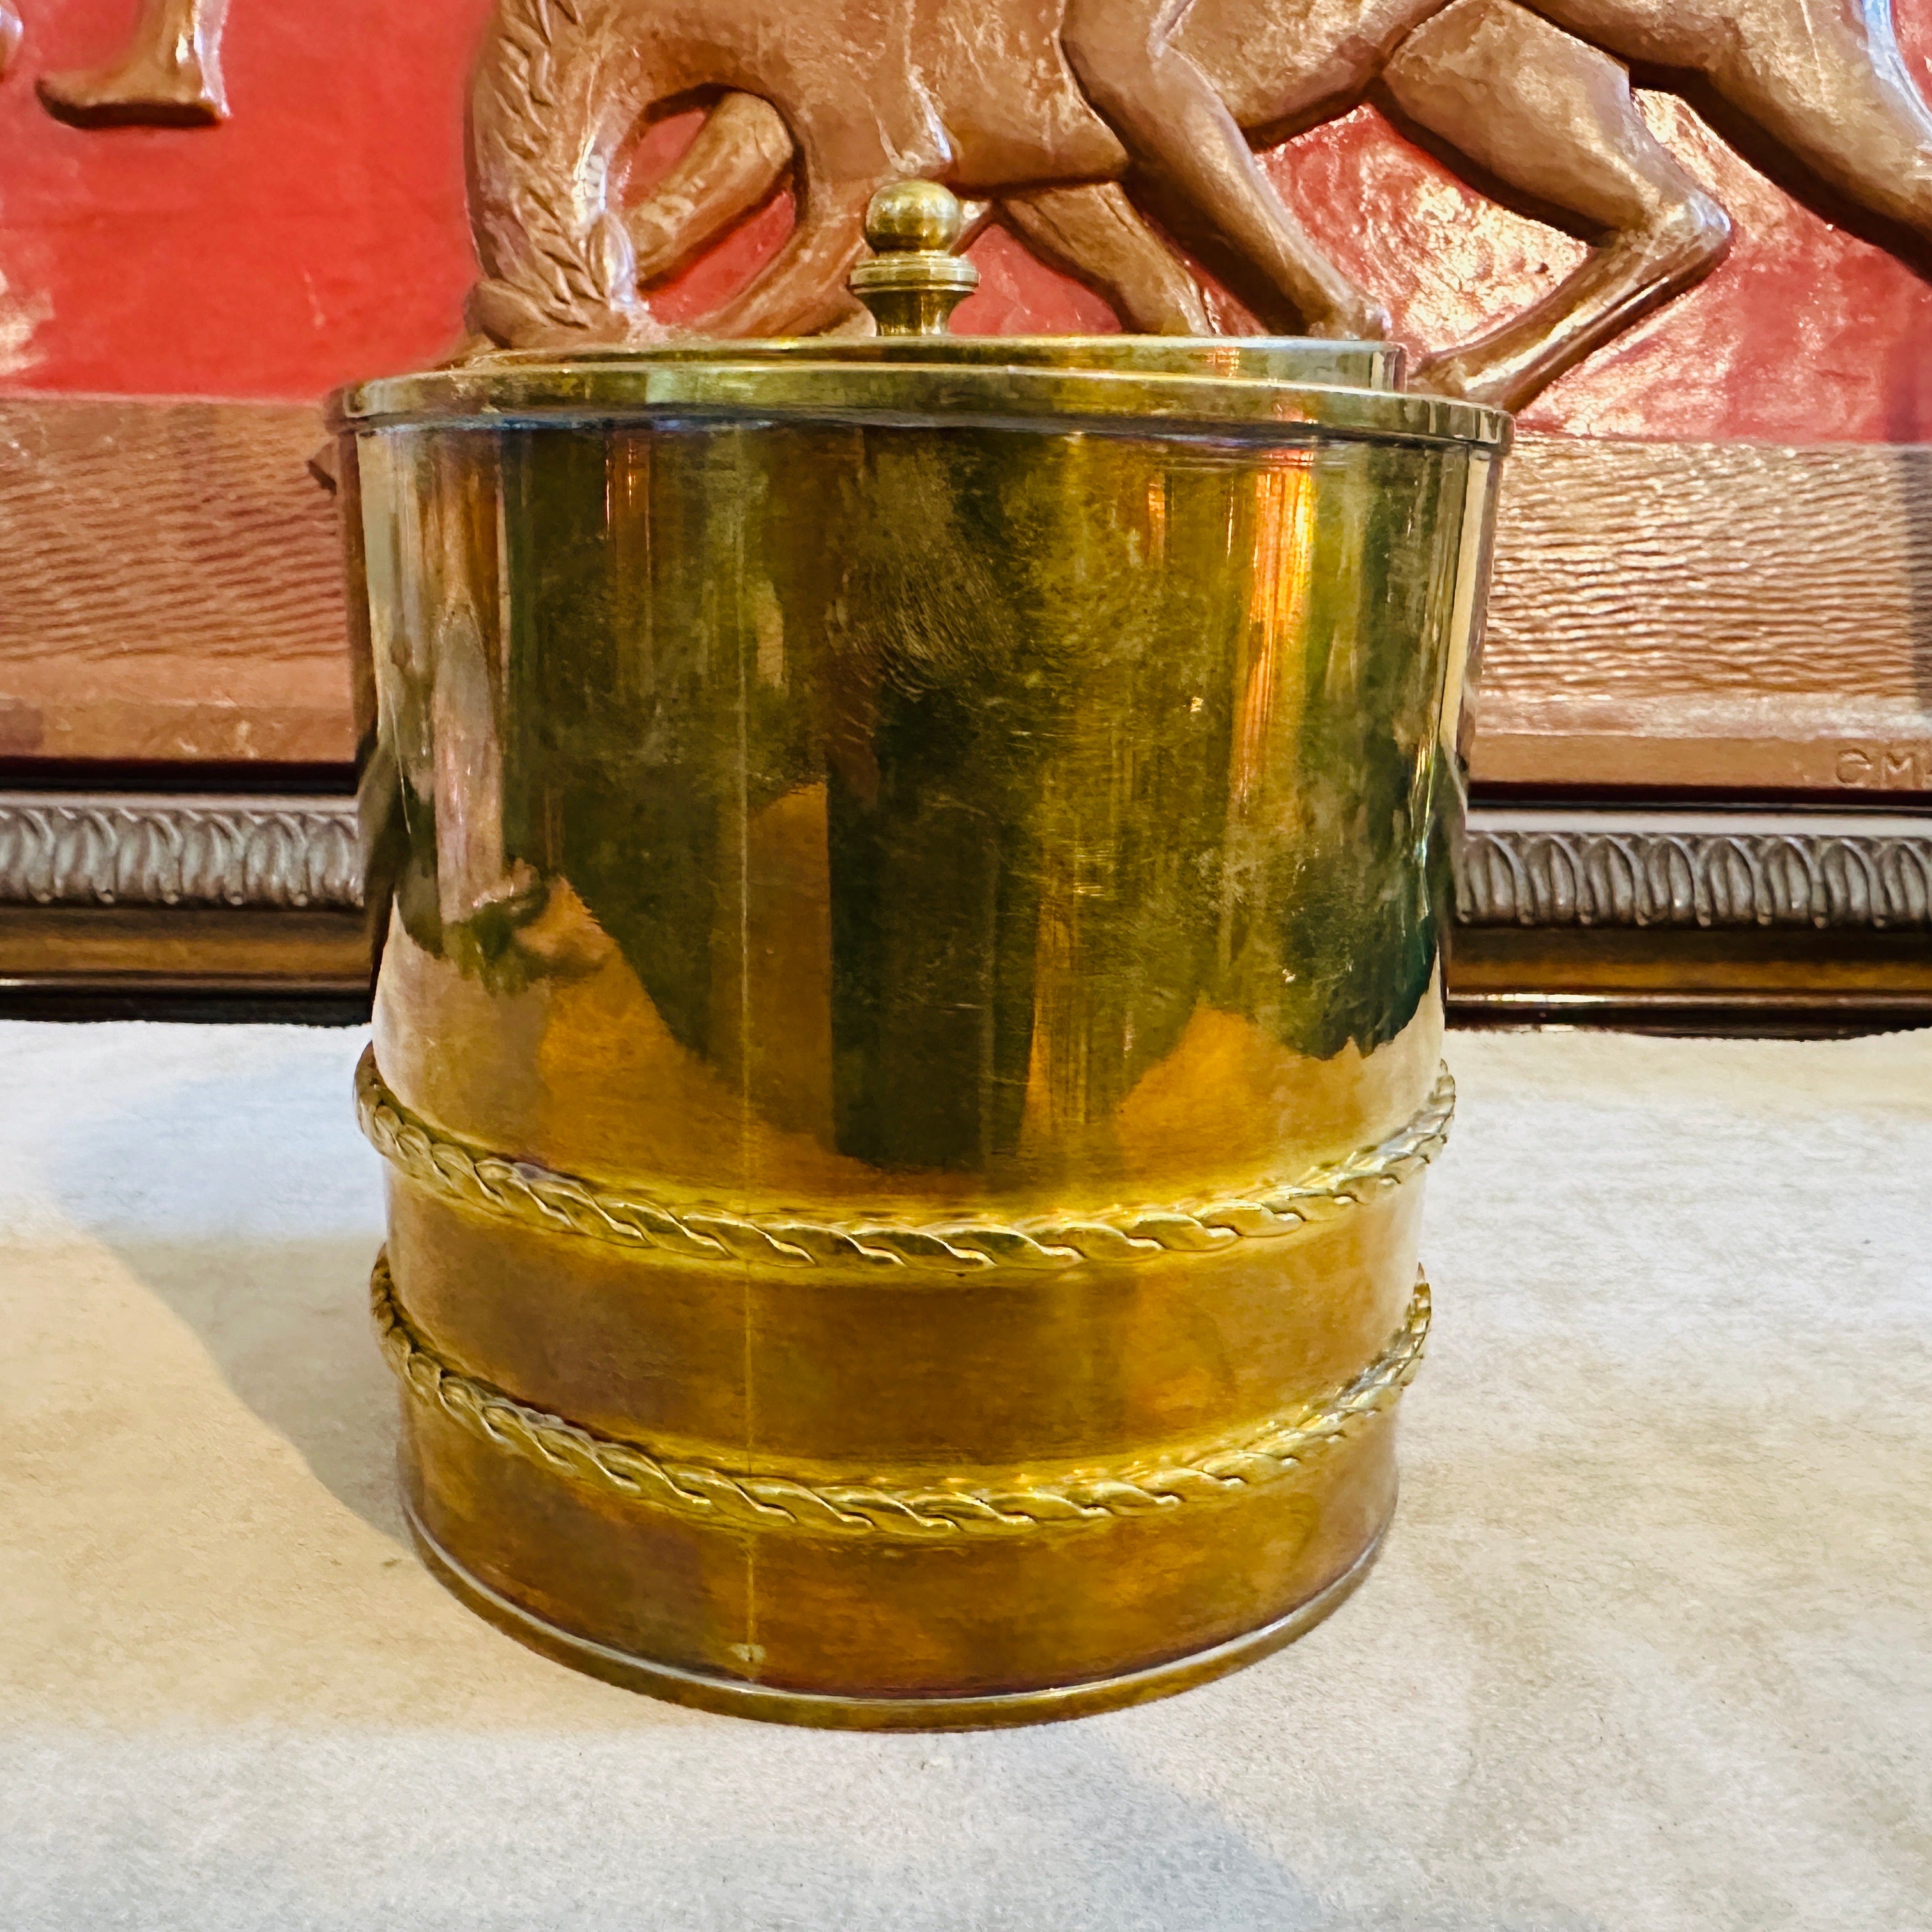 A solid brass ice bucket designed and manufactured in Italy in the Seventies. It's in very good condition overall, brass it's in original patina.
This ice bucket is a standout piece in any home bar or entertaining space, evoking the chic